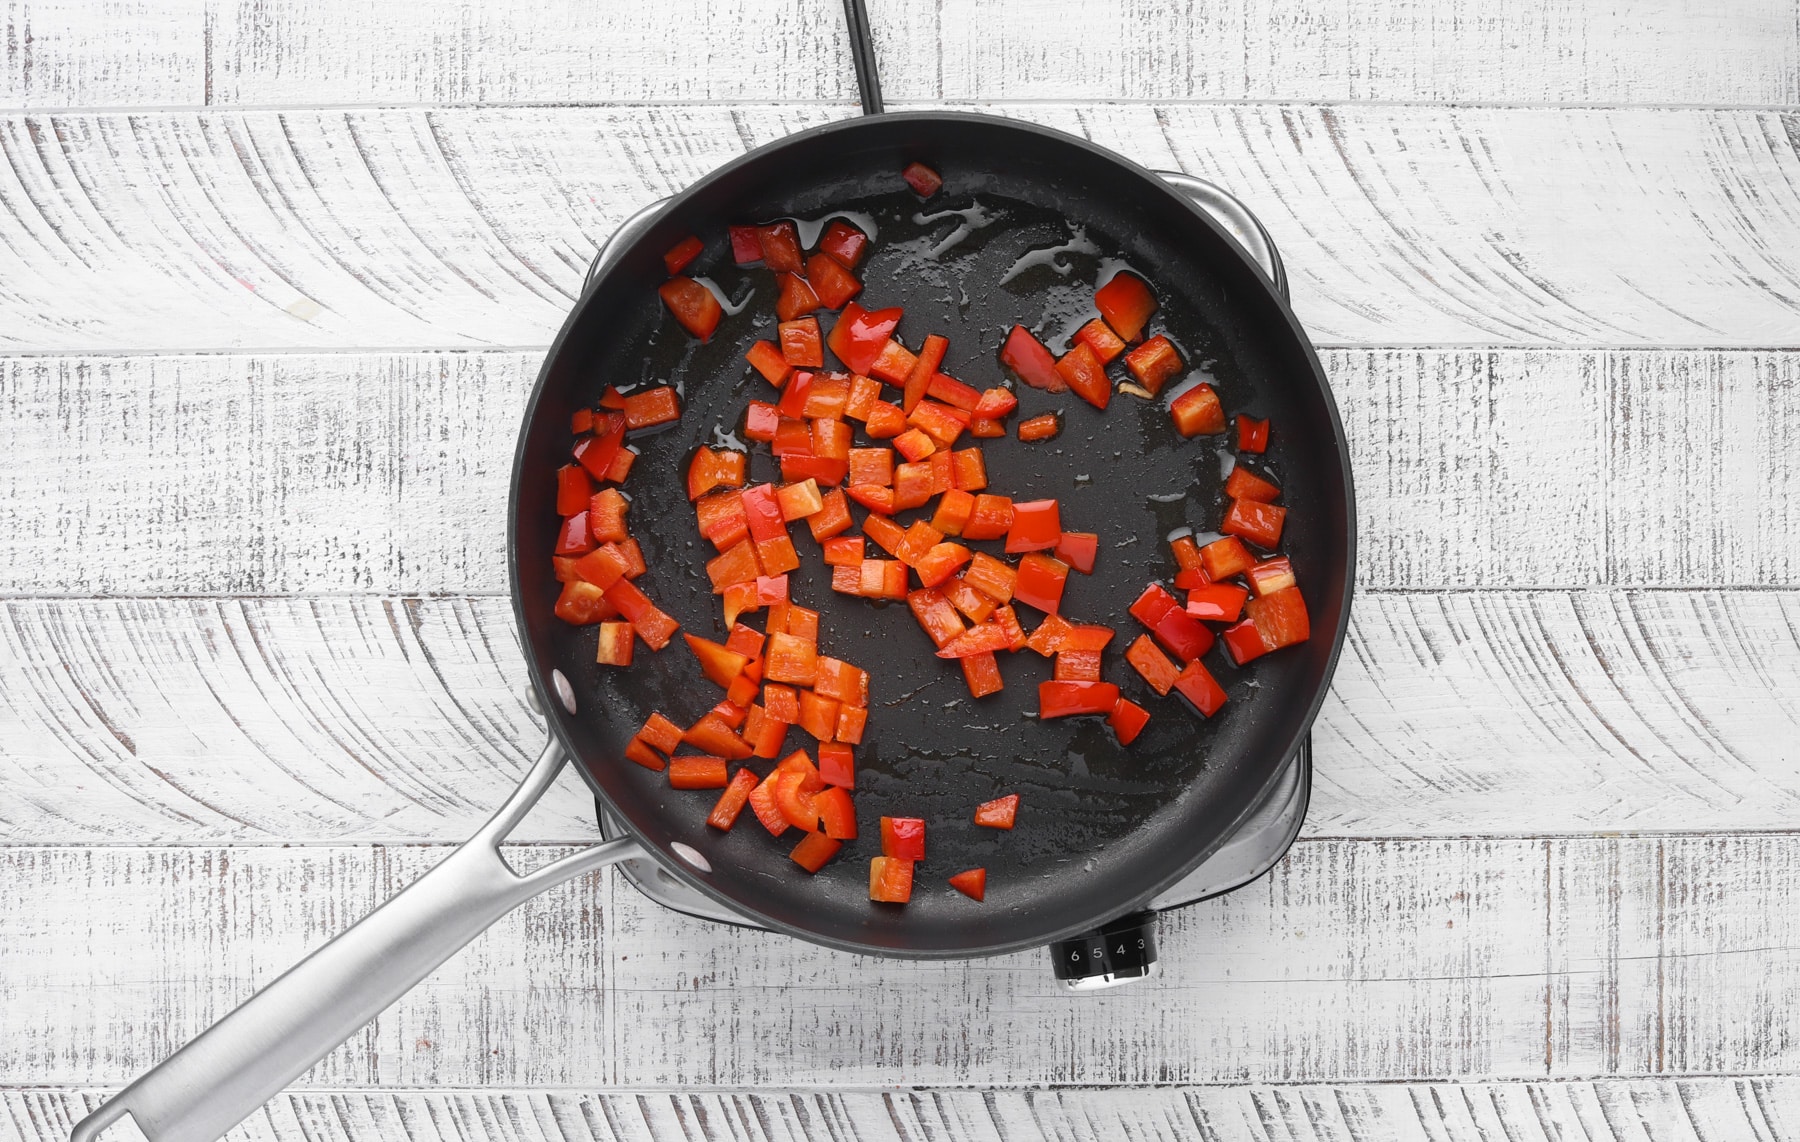 Step 1: Red peppers and olive oil in skillet.